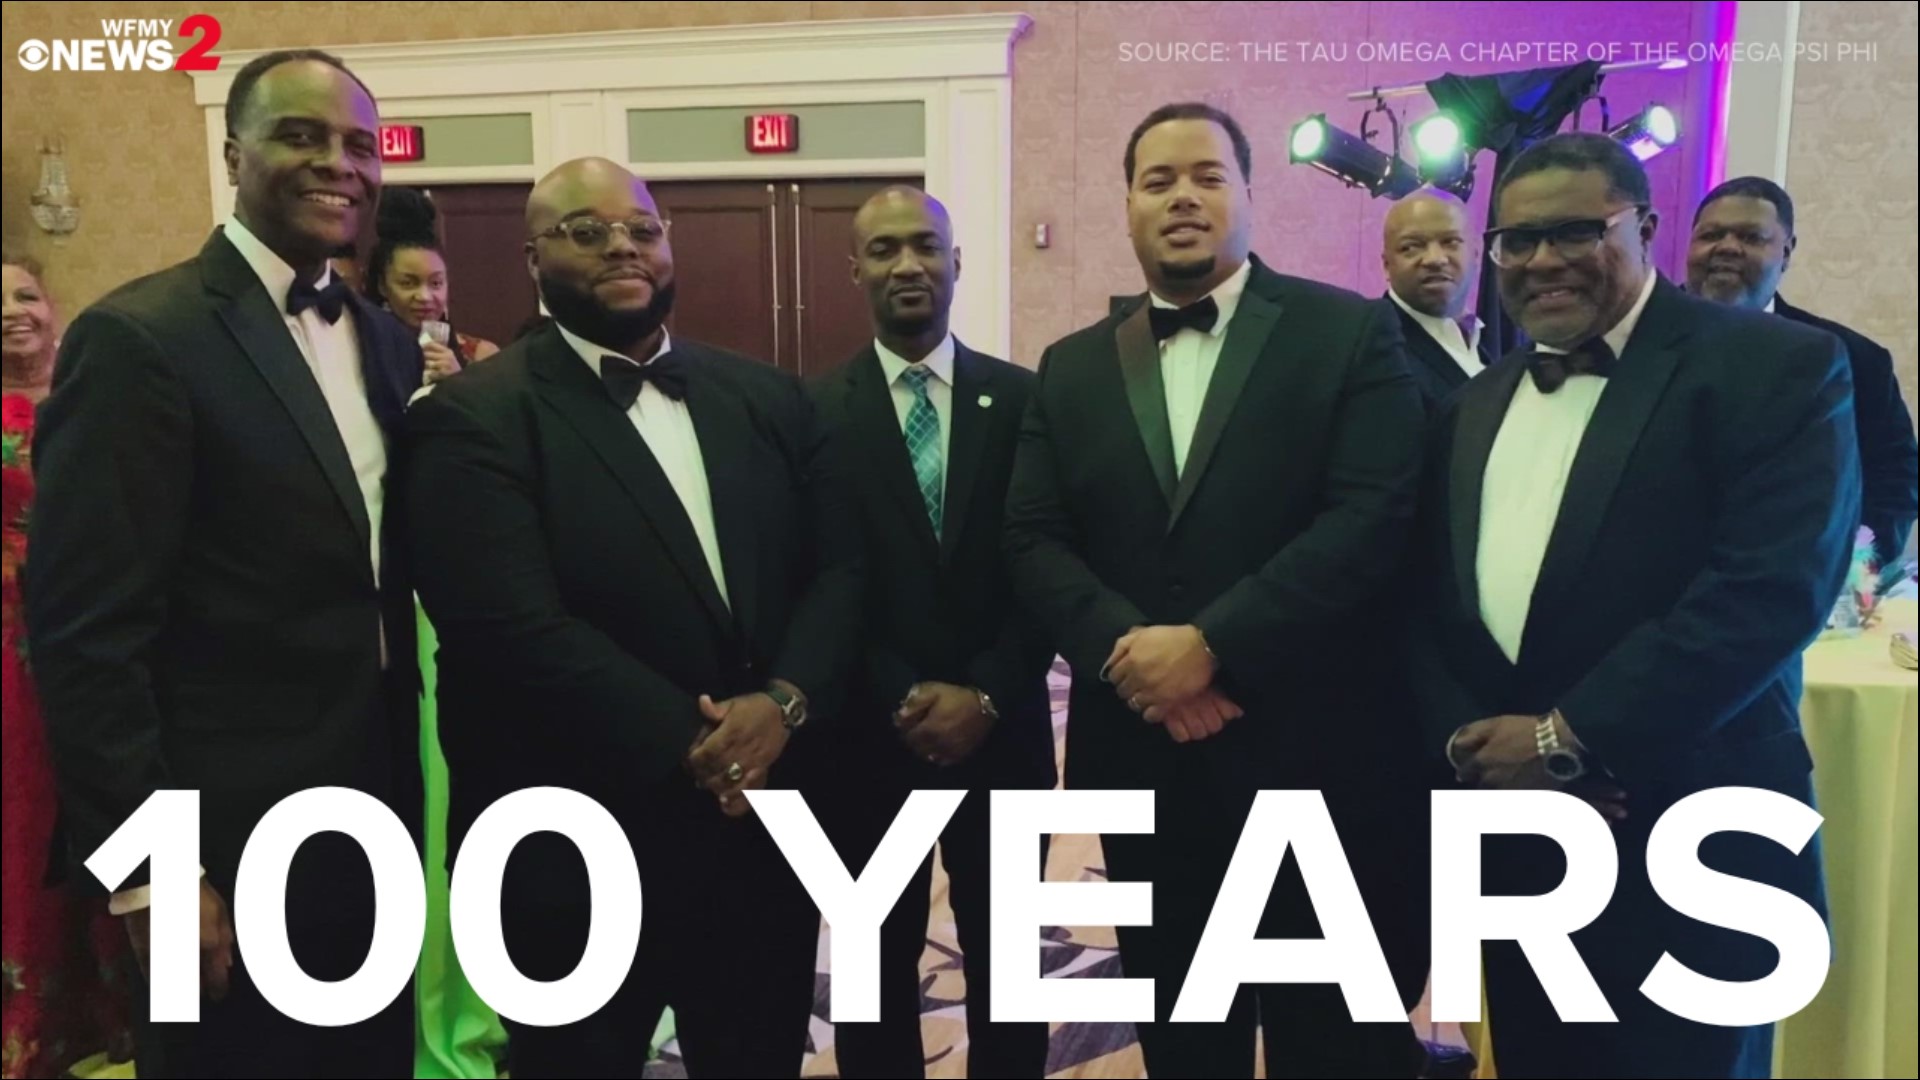 The Tau Omega chapter of the Omega Psi Phi, Inc. has served the community since 1923.